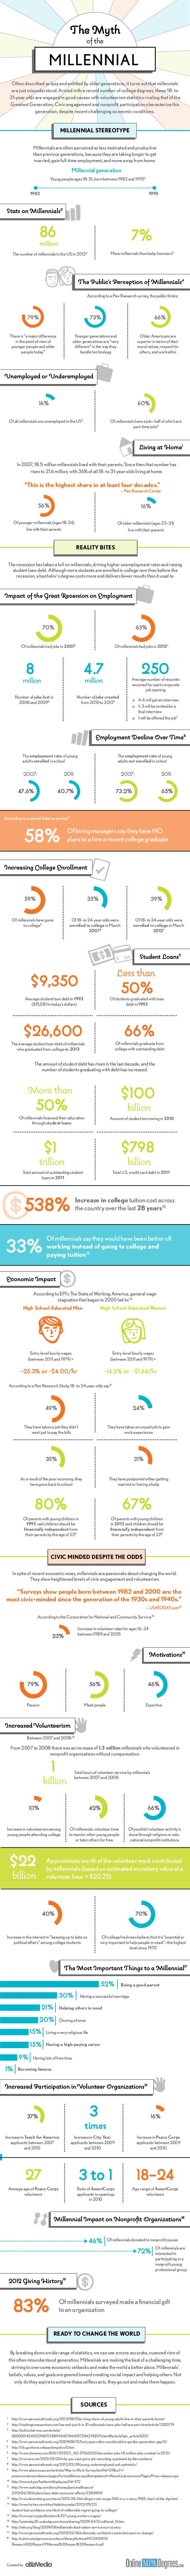 The Myth of the Millennial Generation Infographic